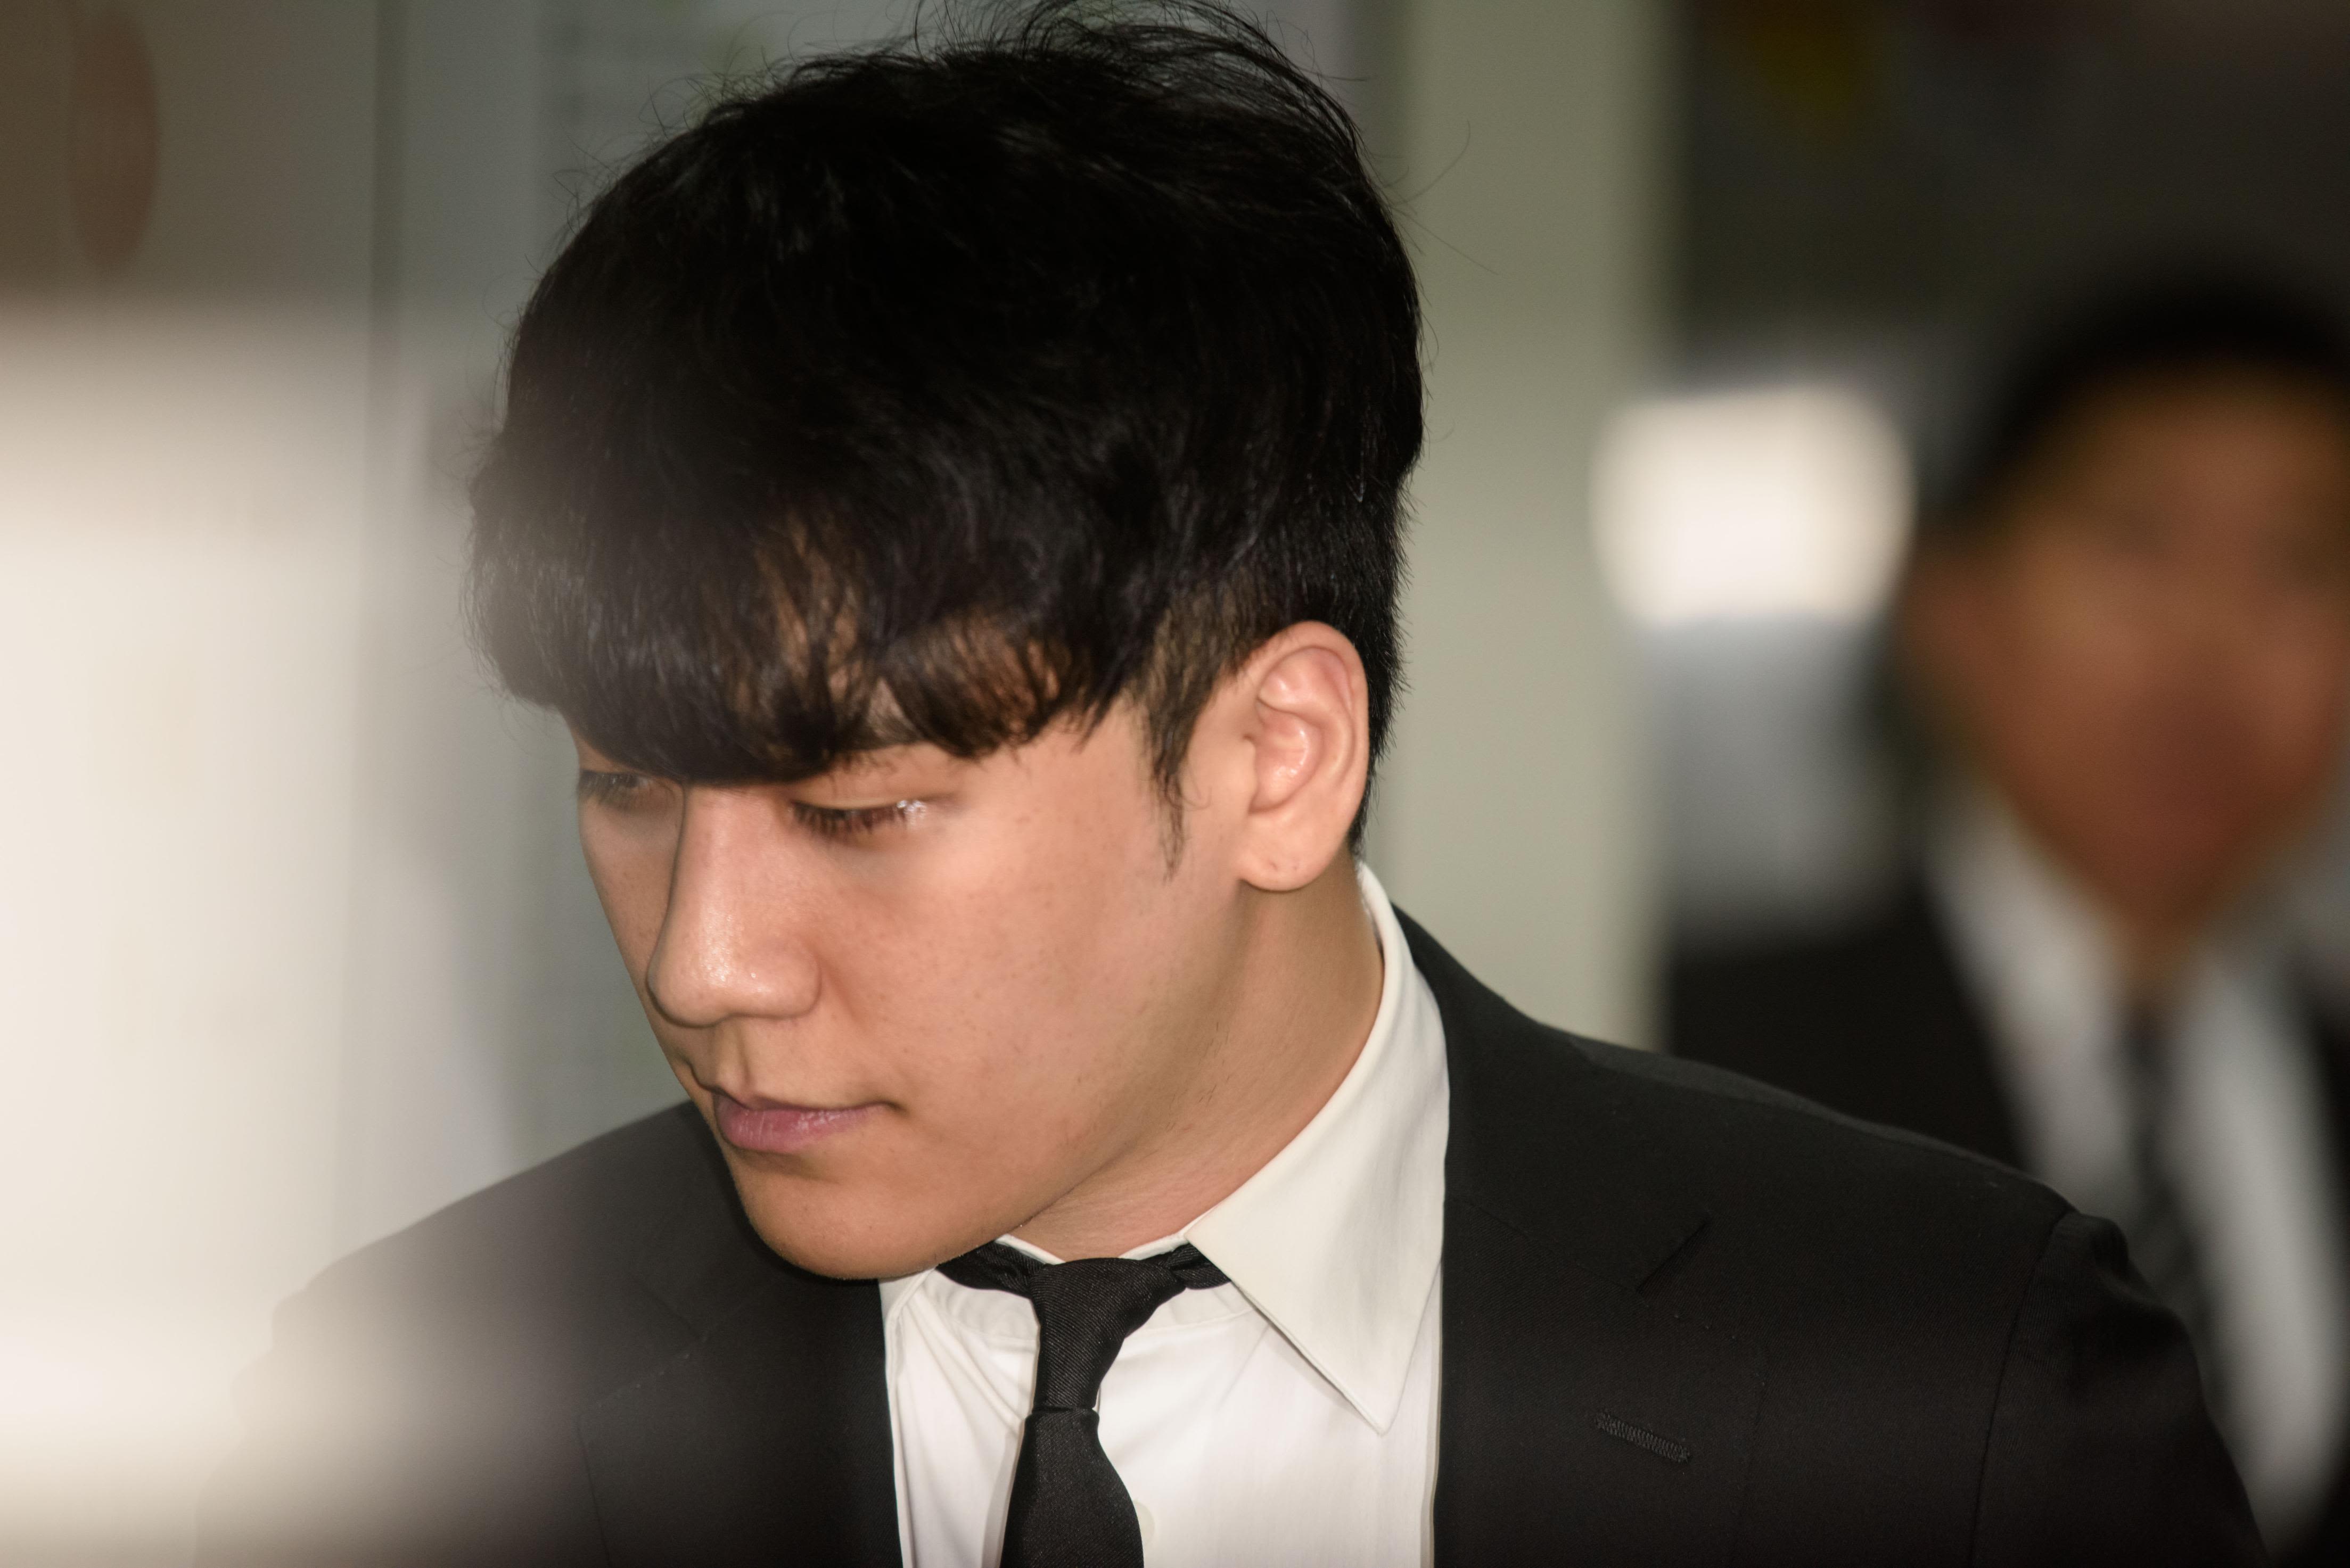 Indian Gang Bang Outdoor Rape Chudai Video - Seungri, former Big Bang member, indicted on prostitution charges | CNN